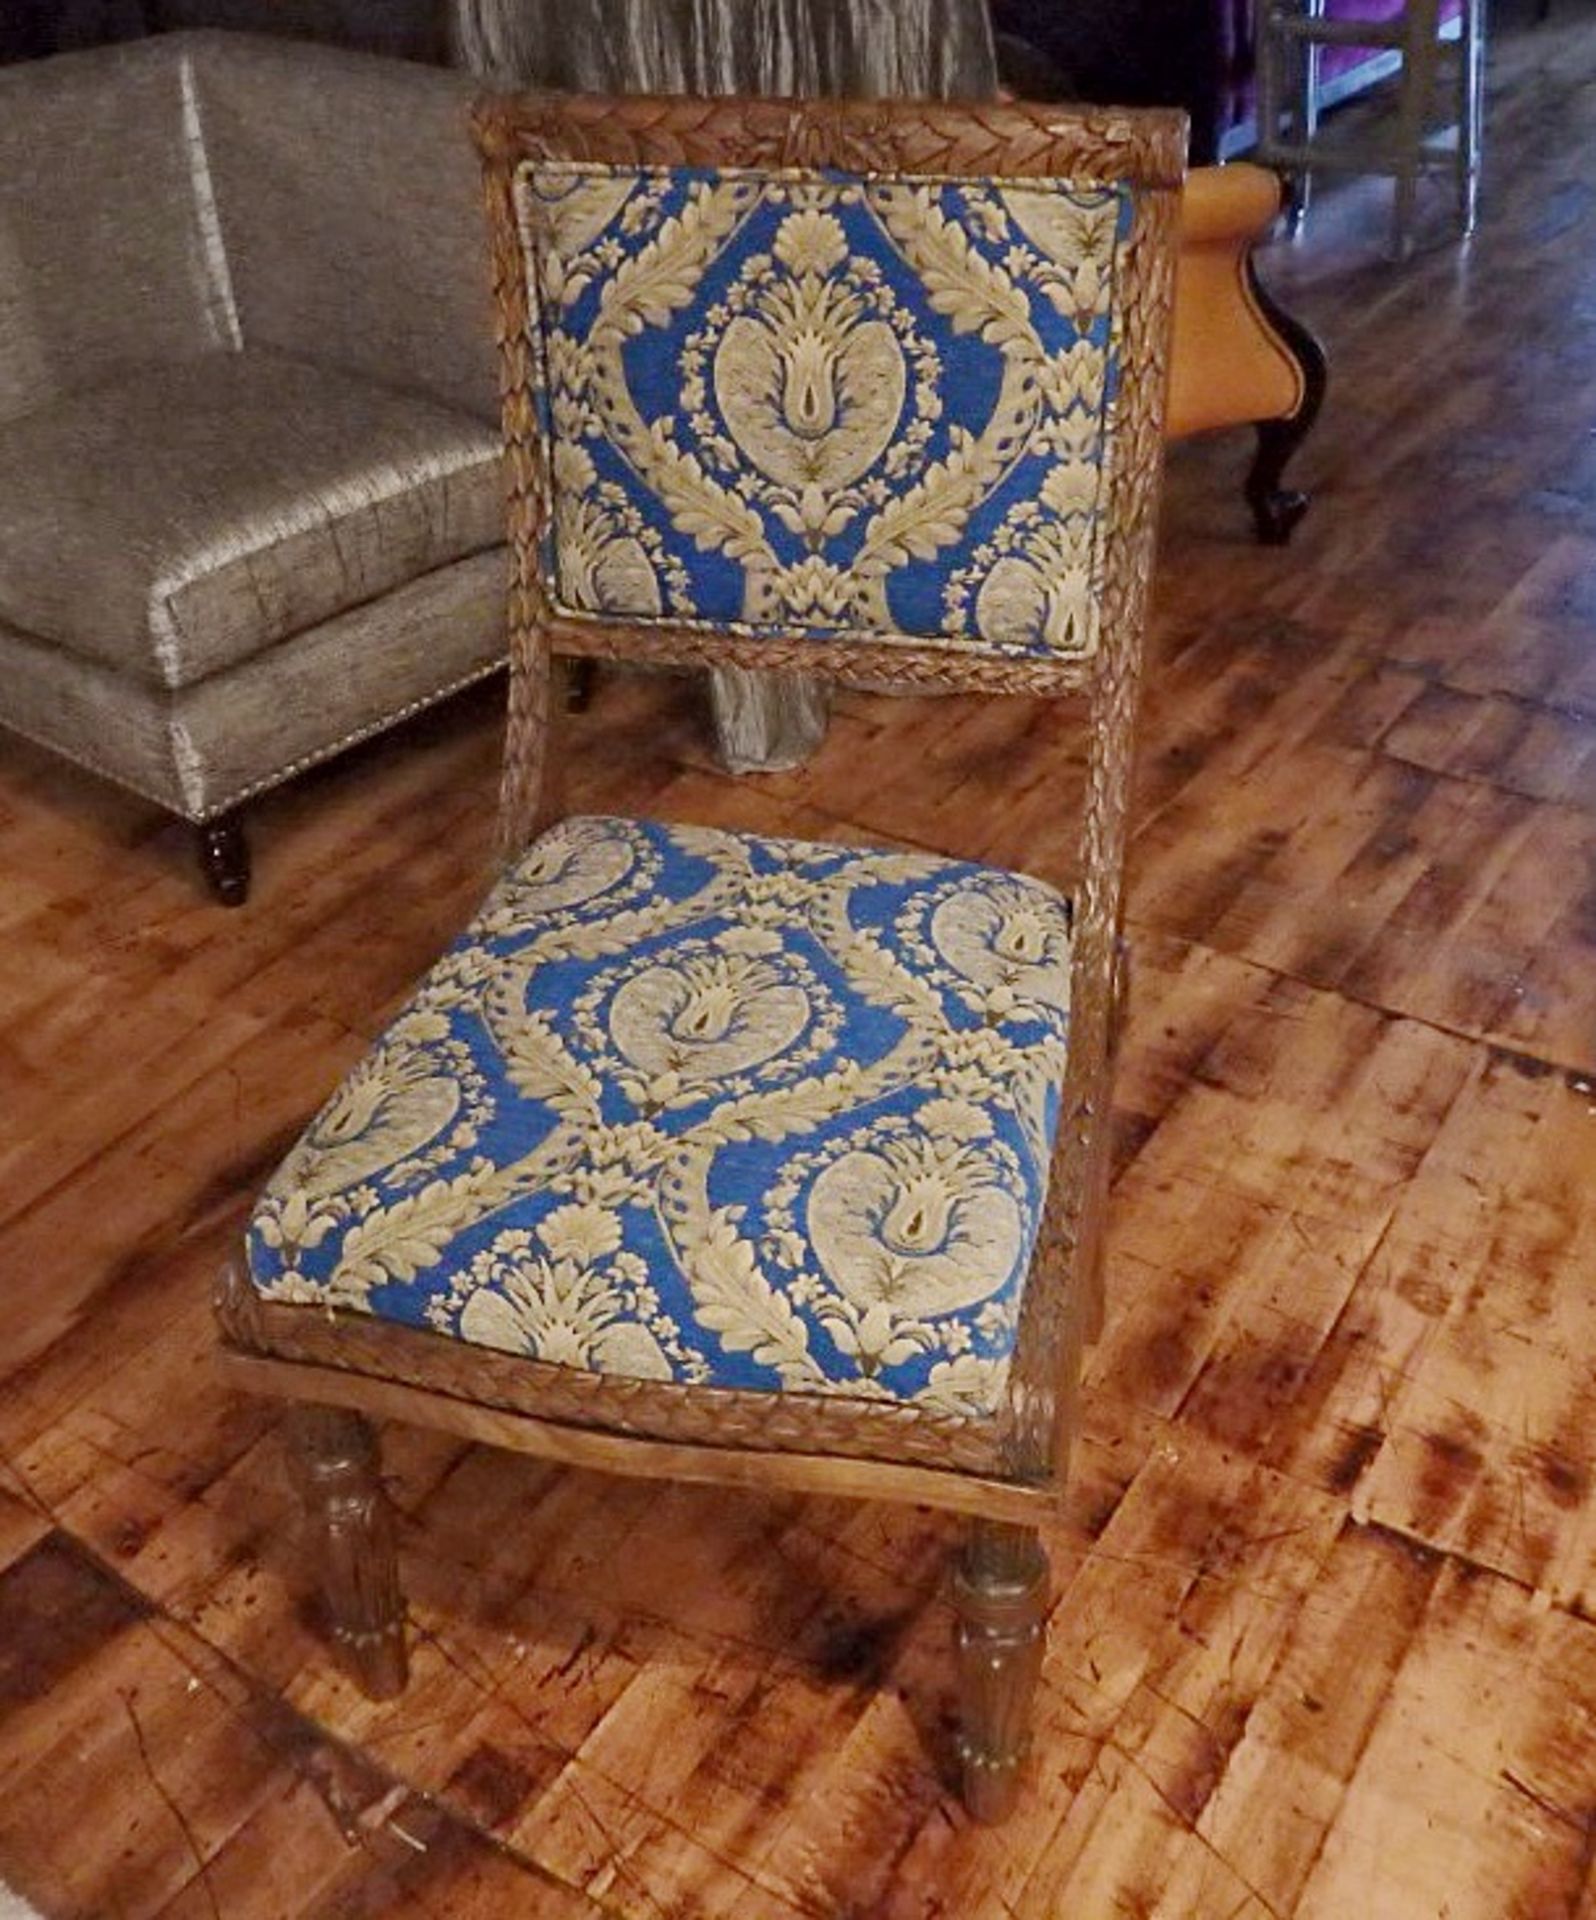 1 x Carved Period Reproduction Dining Chair - Dimensions: H100 x W40 x D55cm - Ref: DE065 (AWL) -